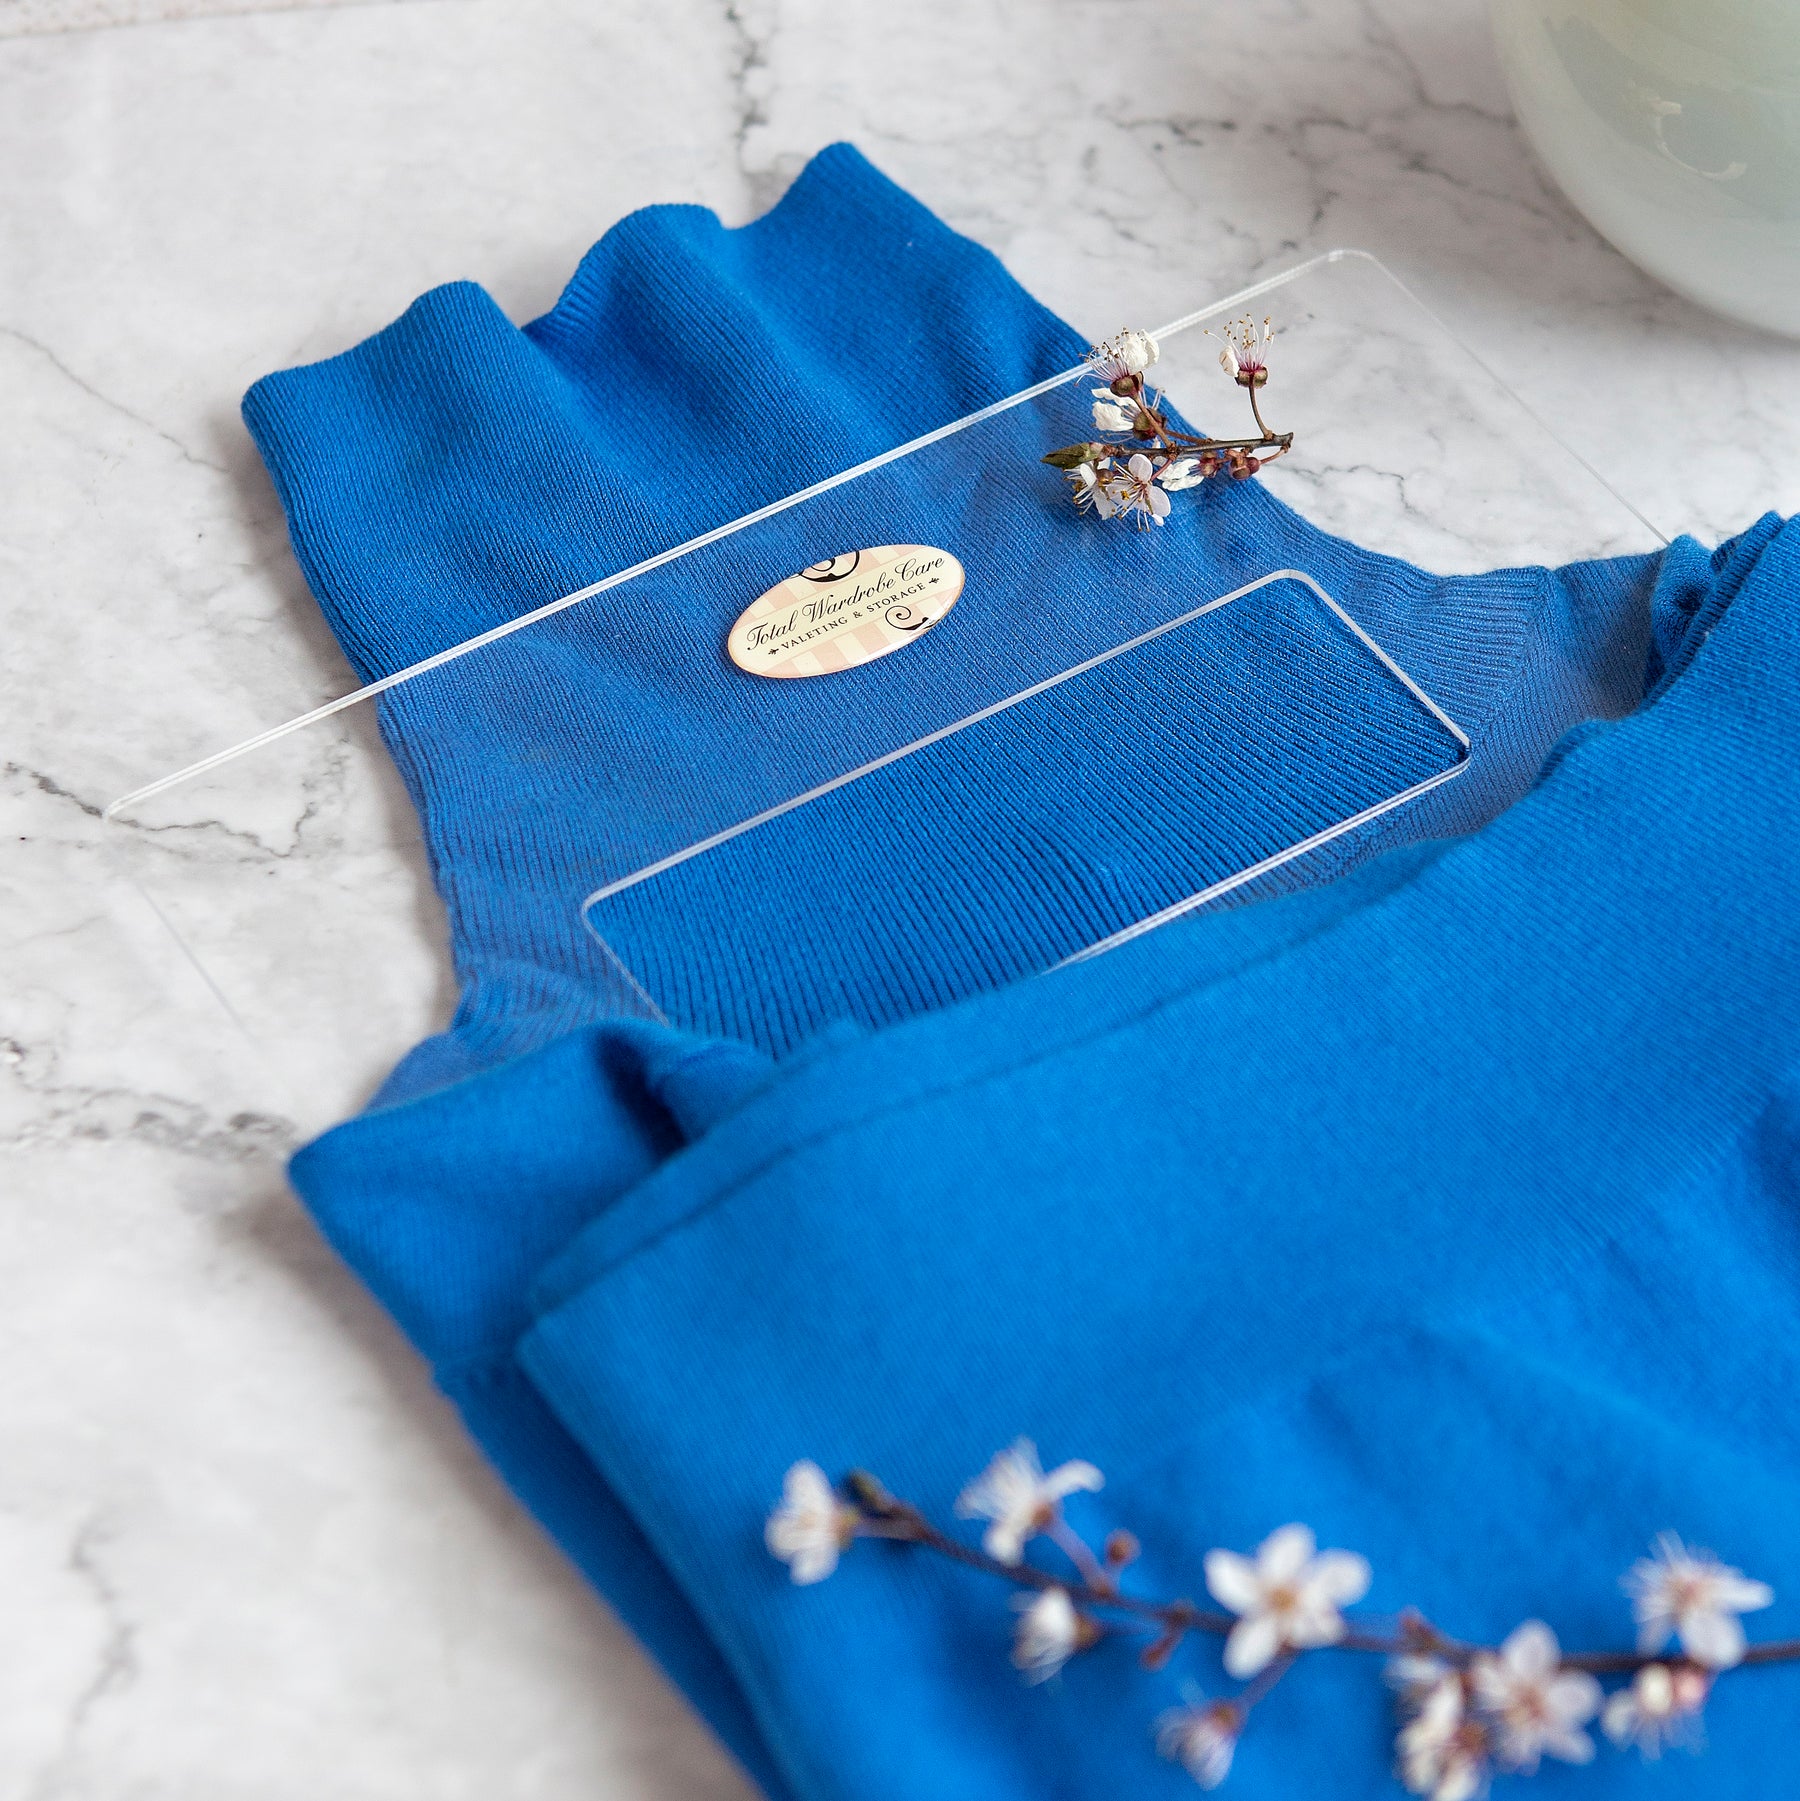 Blue turtle neck folded on folding palette on white marble surface with small white flowers present